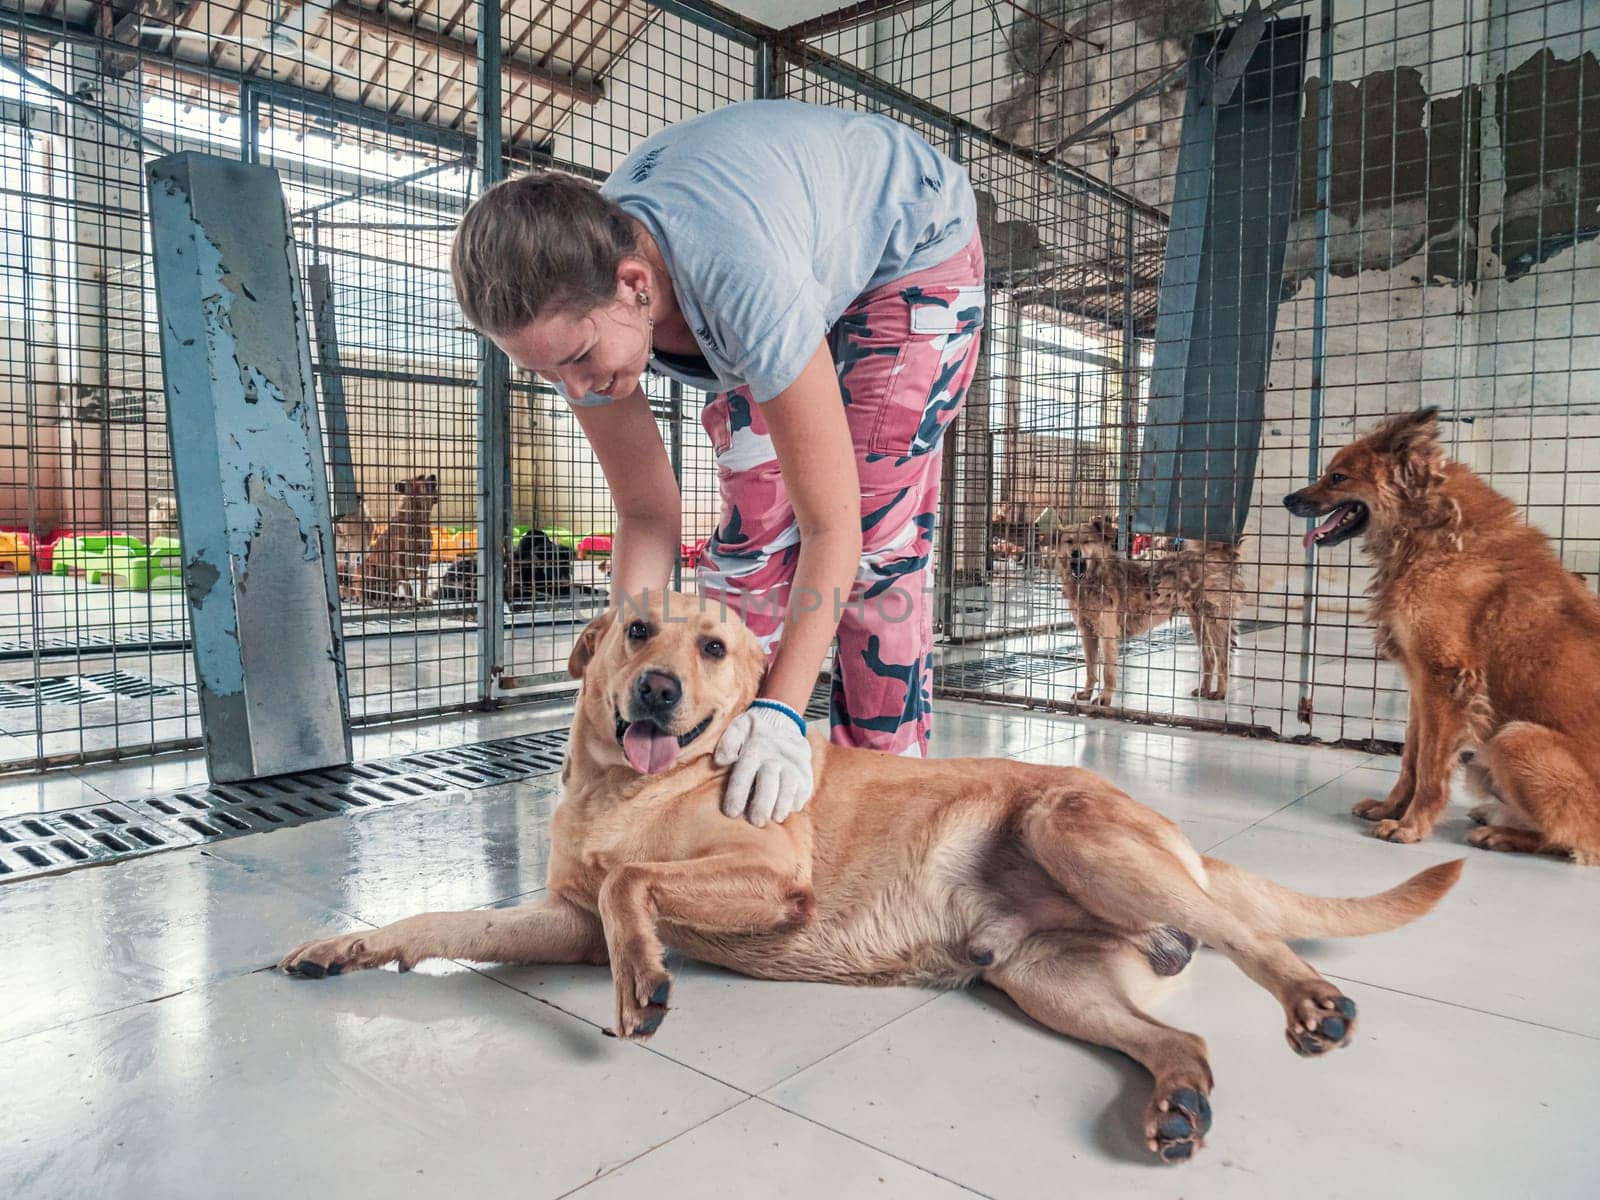 Young girl petting caged stray dog in pet shelter. People, Animals, Volunteering And Helping Concept.